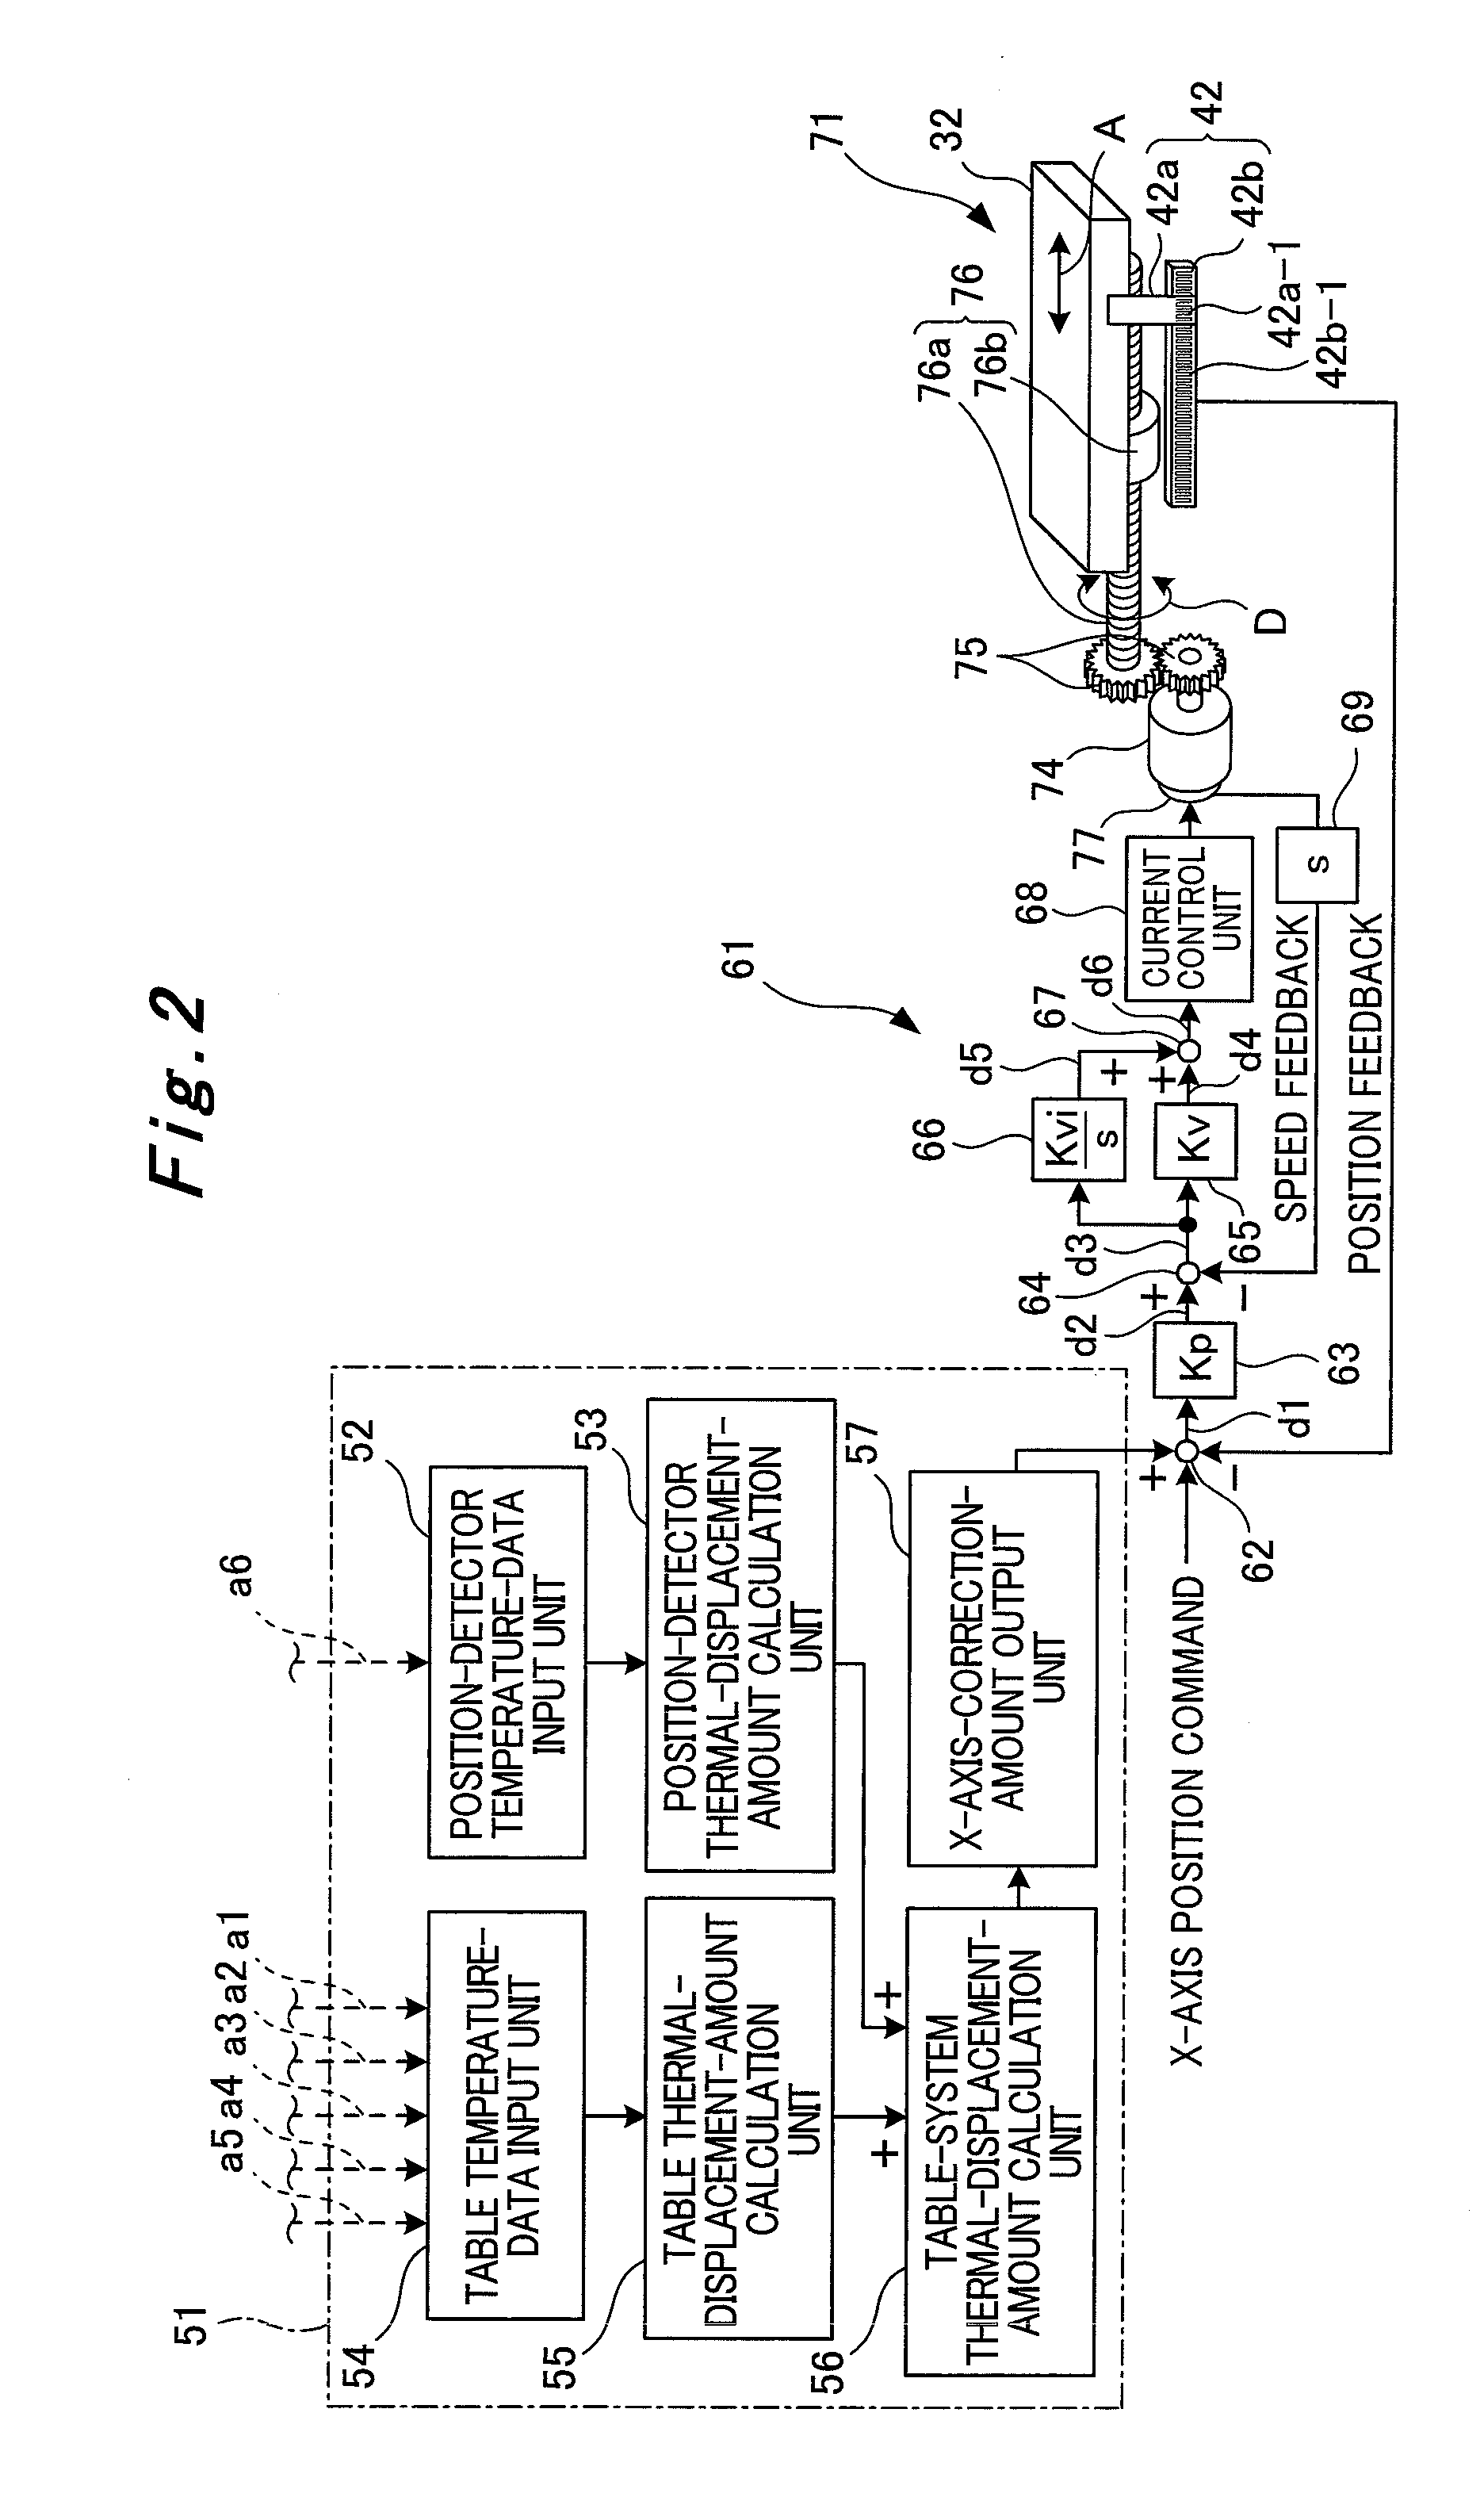 System for correcting thermal displacement of machine tool